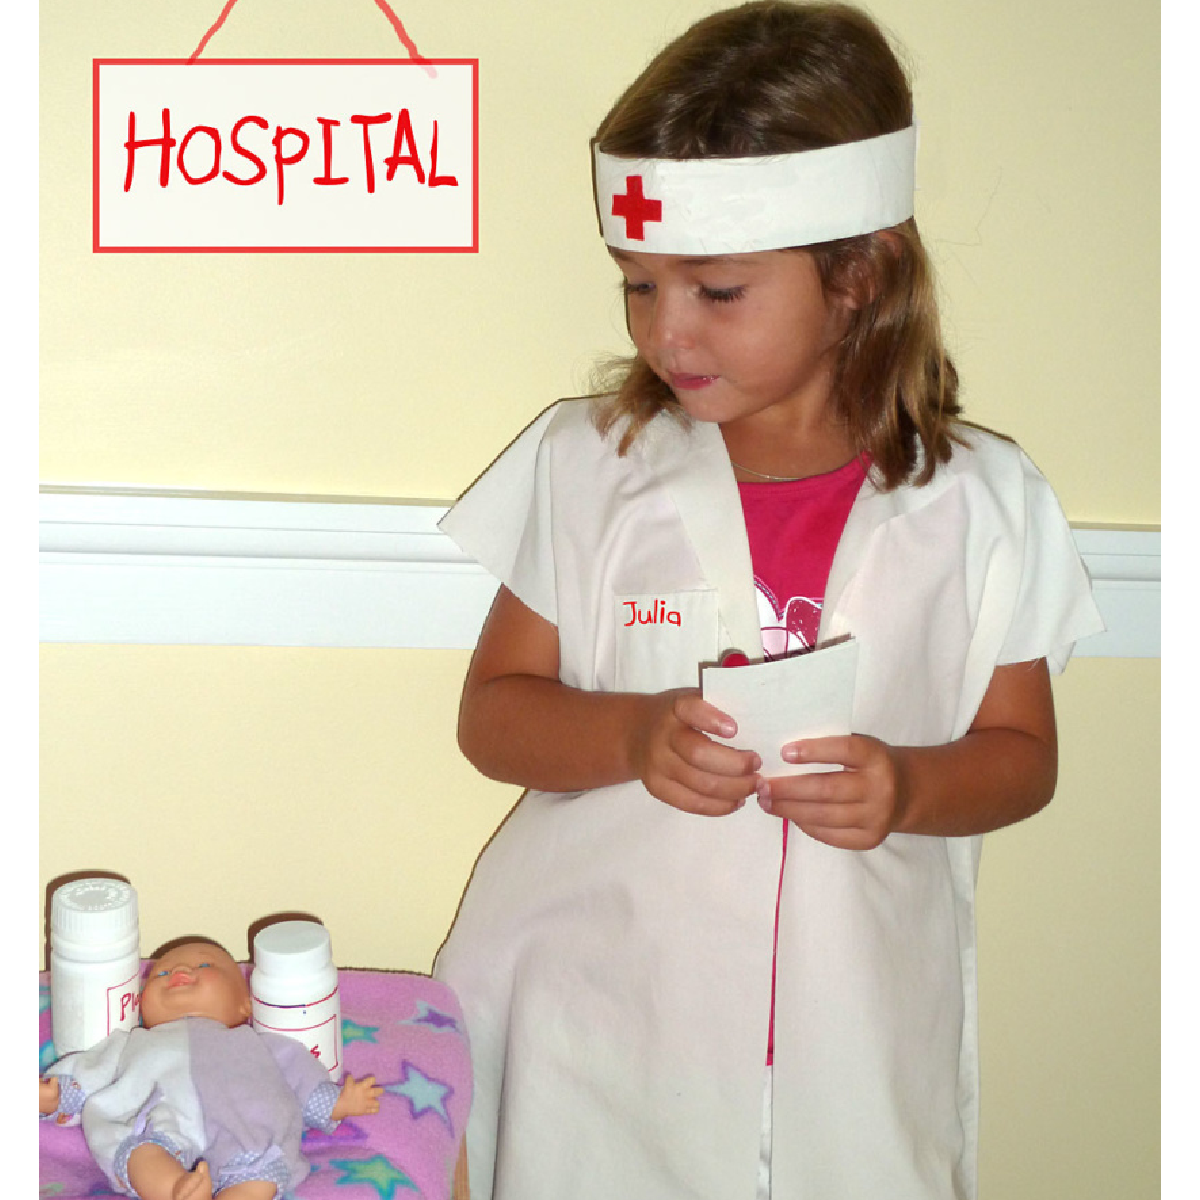 dress up ideas- nurses costume with head band and baby doll- kids activities blog